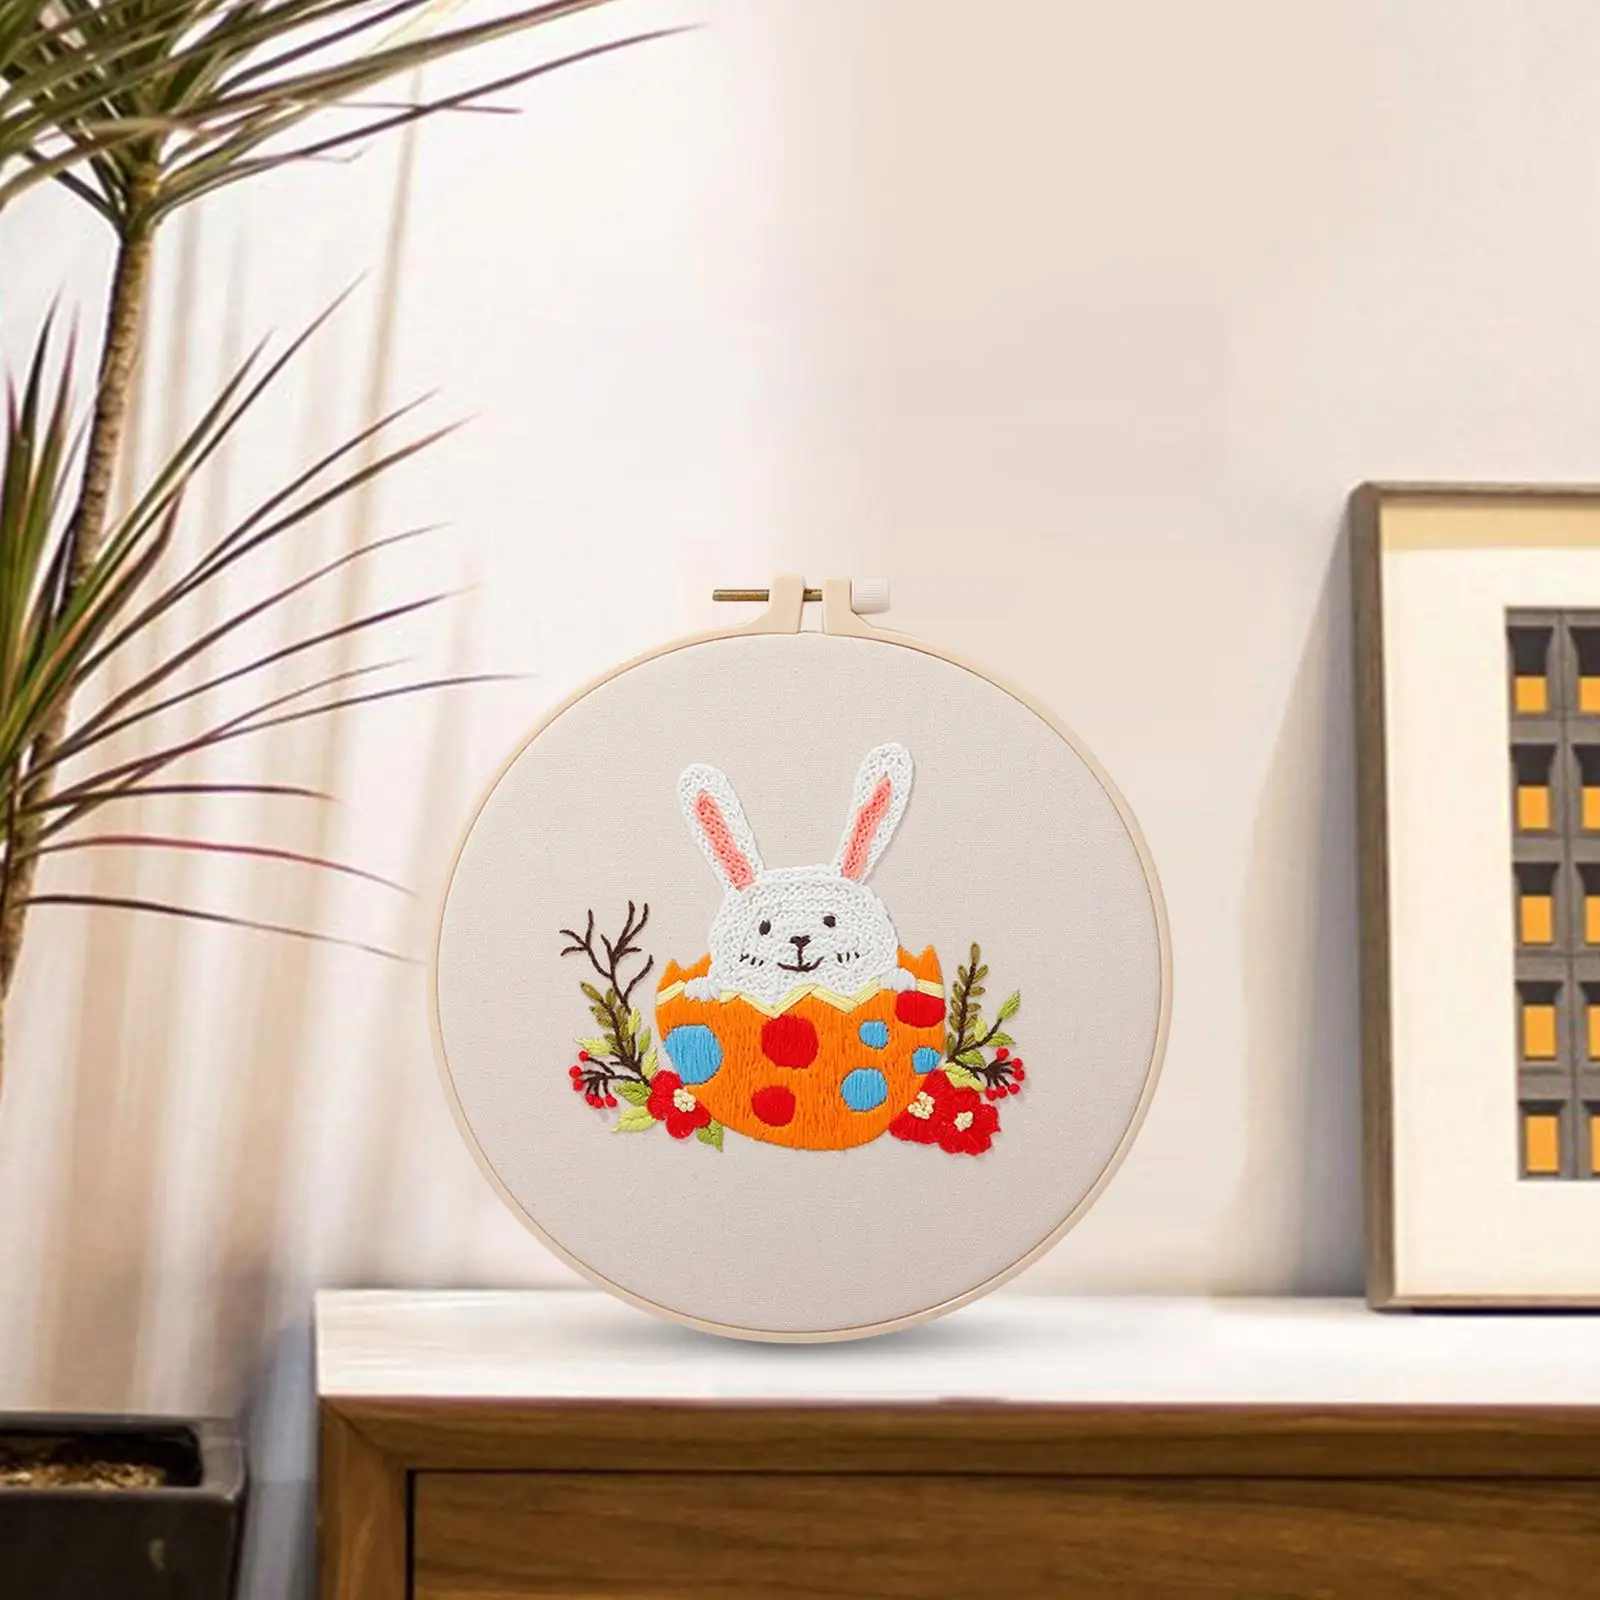 Rabbit Embroidery Starter Kit Adjustable Embroidery Hoop for Adults DIY Cross Stitch Needlework Crafts Home Decor Gift Supplies